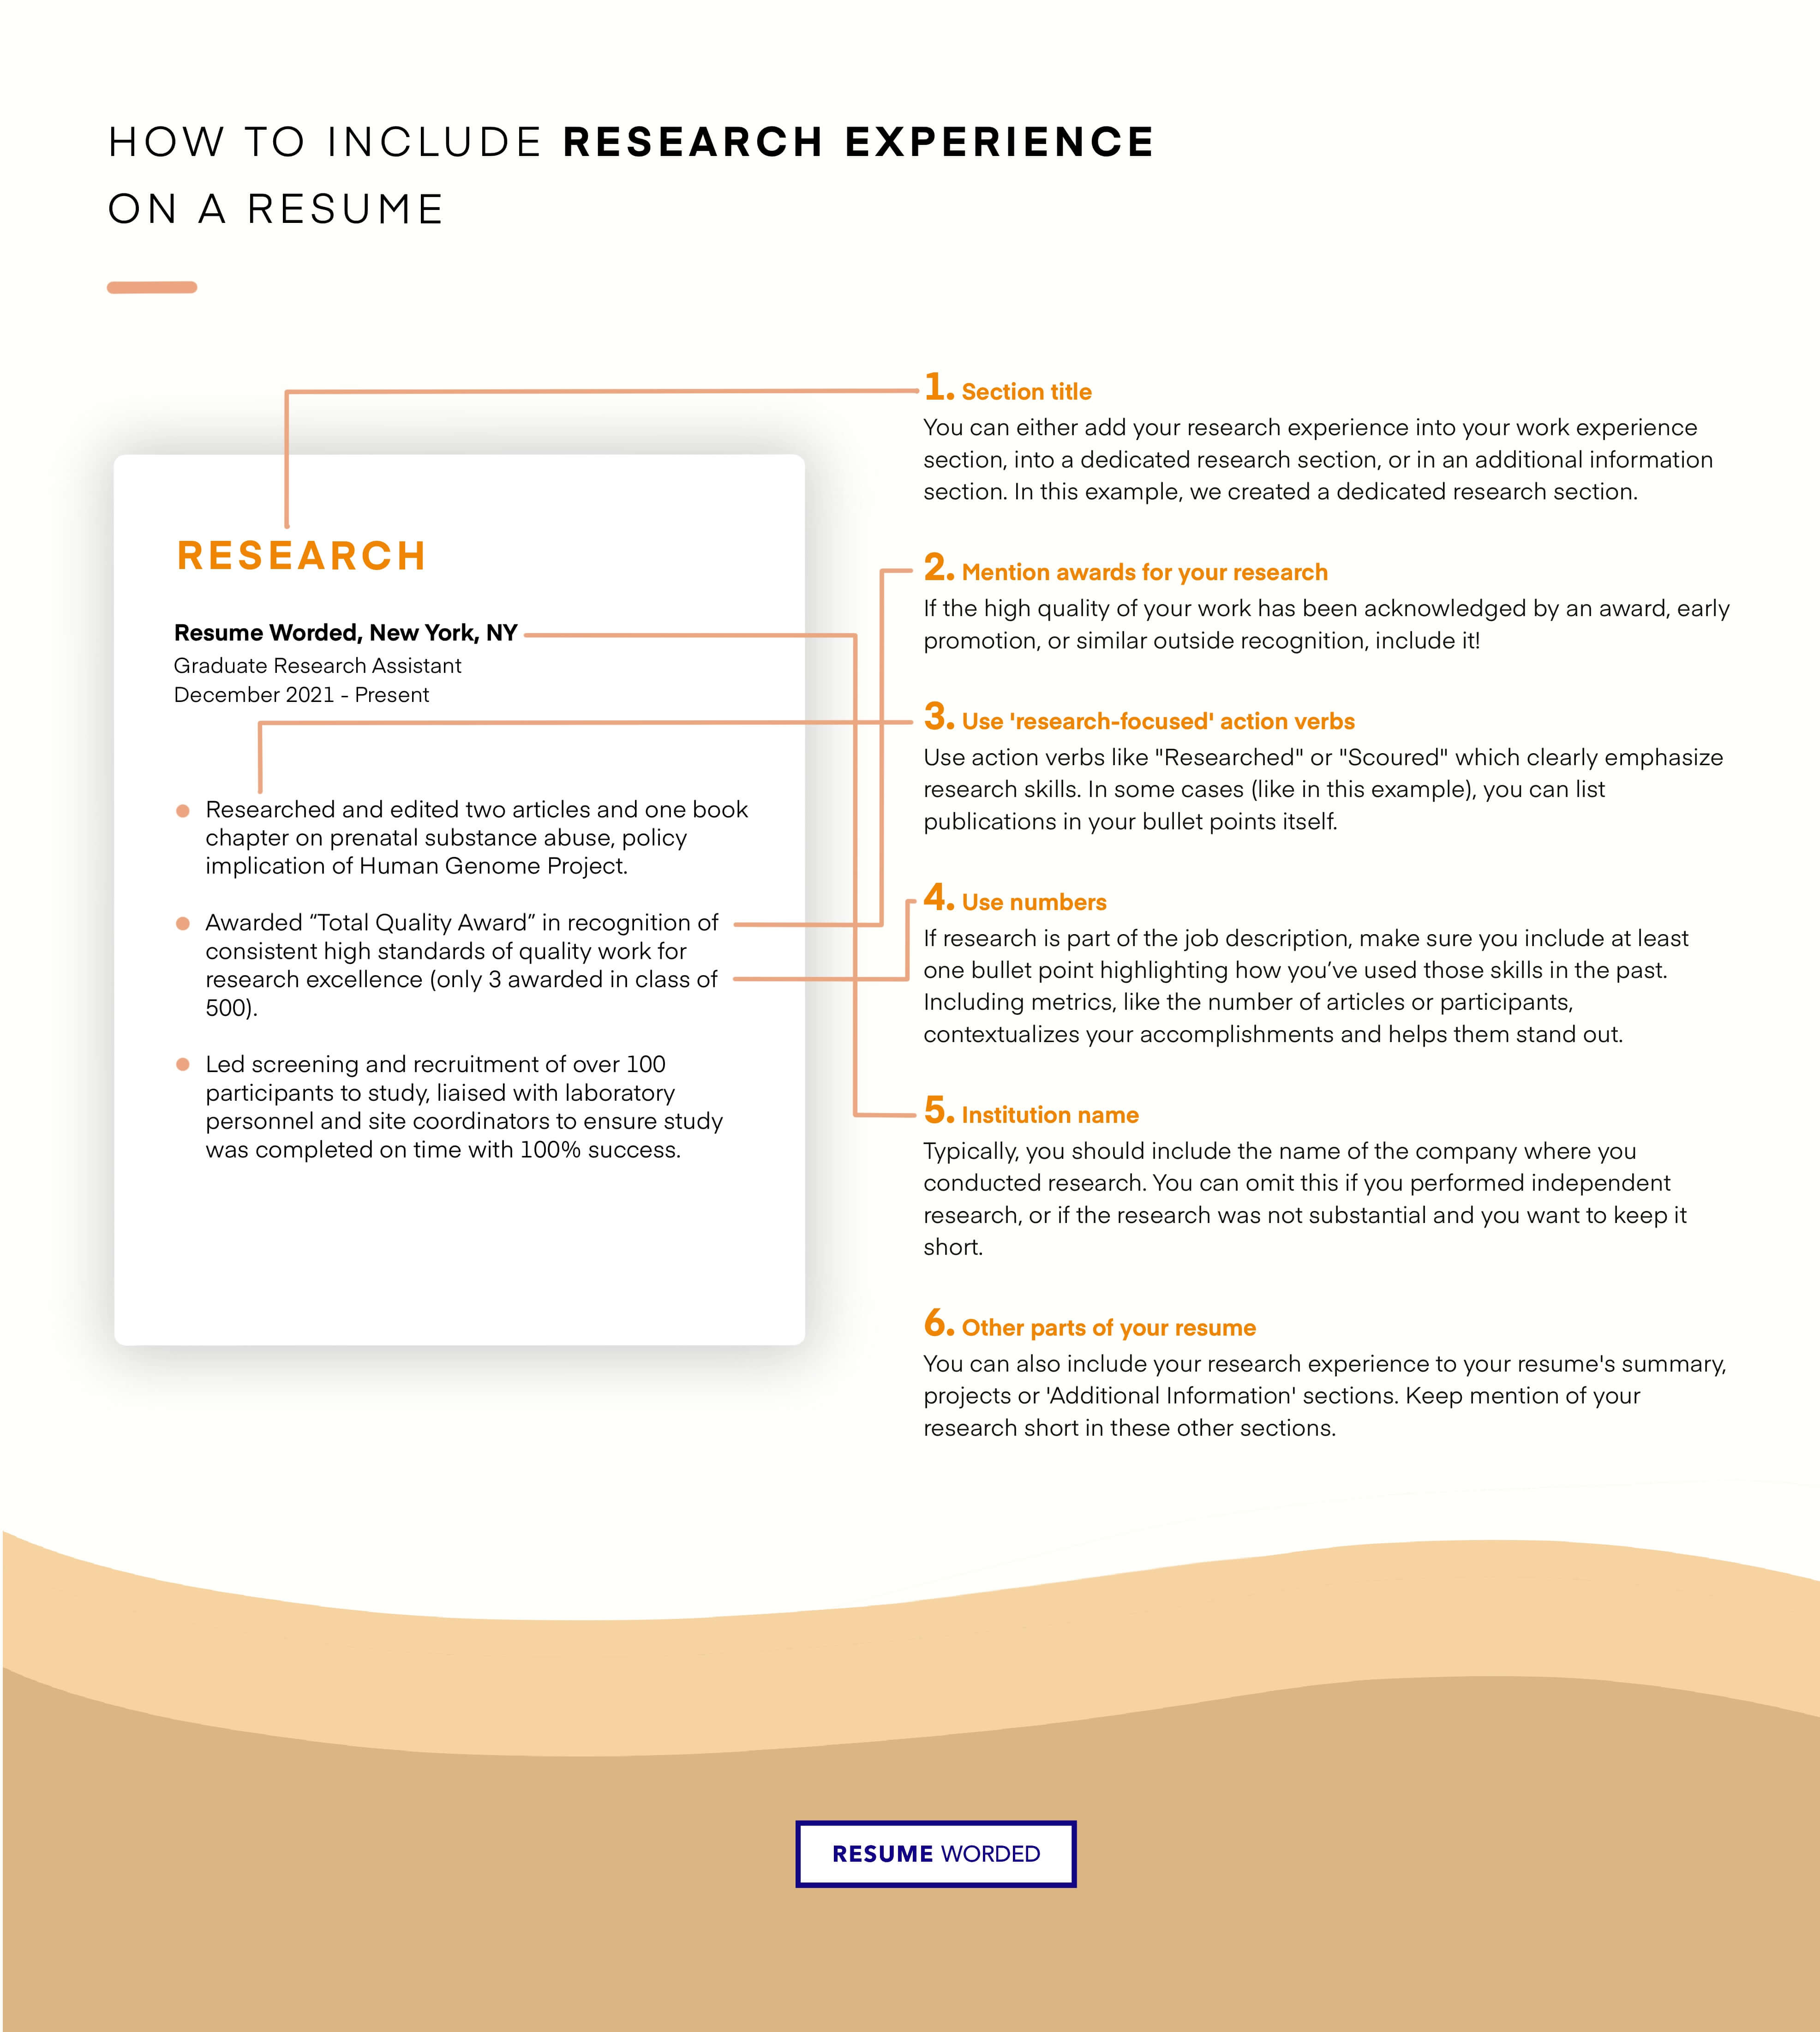 Indicate your research skills. - Sales Leader Resume